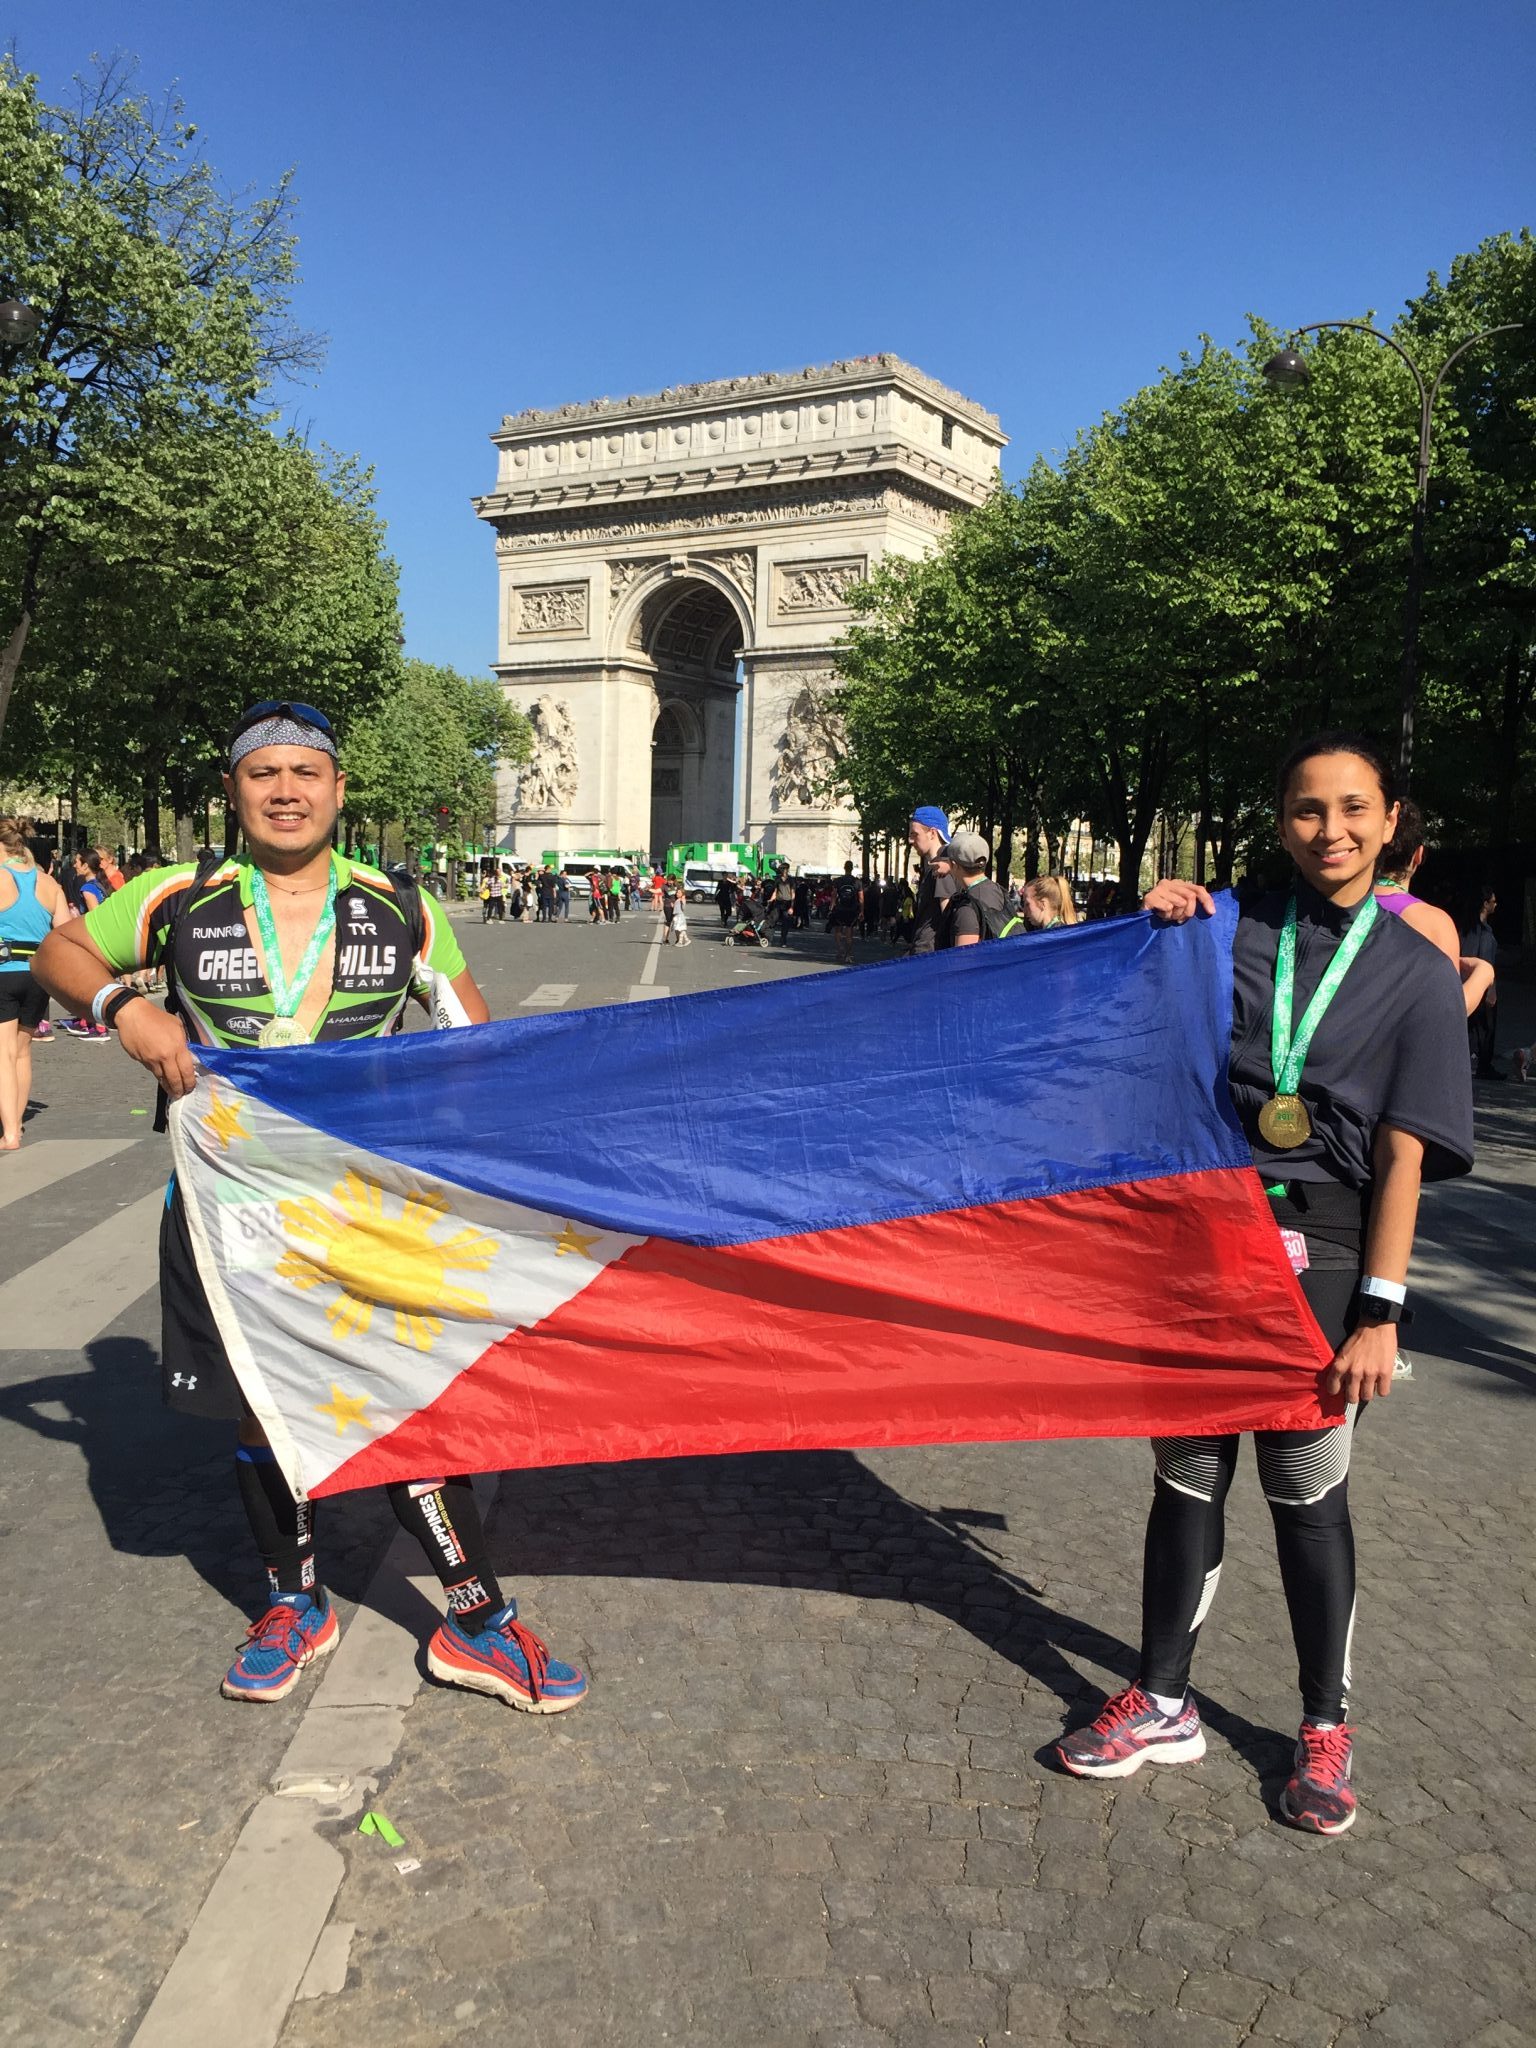 Gene Tiongco always brings a Philippine flag to his marathons and as a result, many kababayans watching the race also beam with pride seeing a Filipino runner